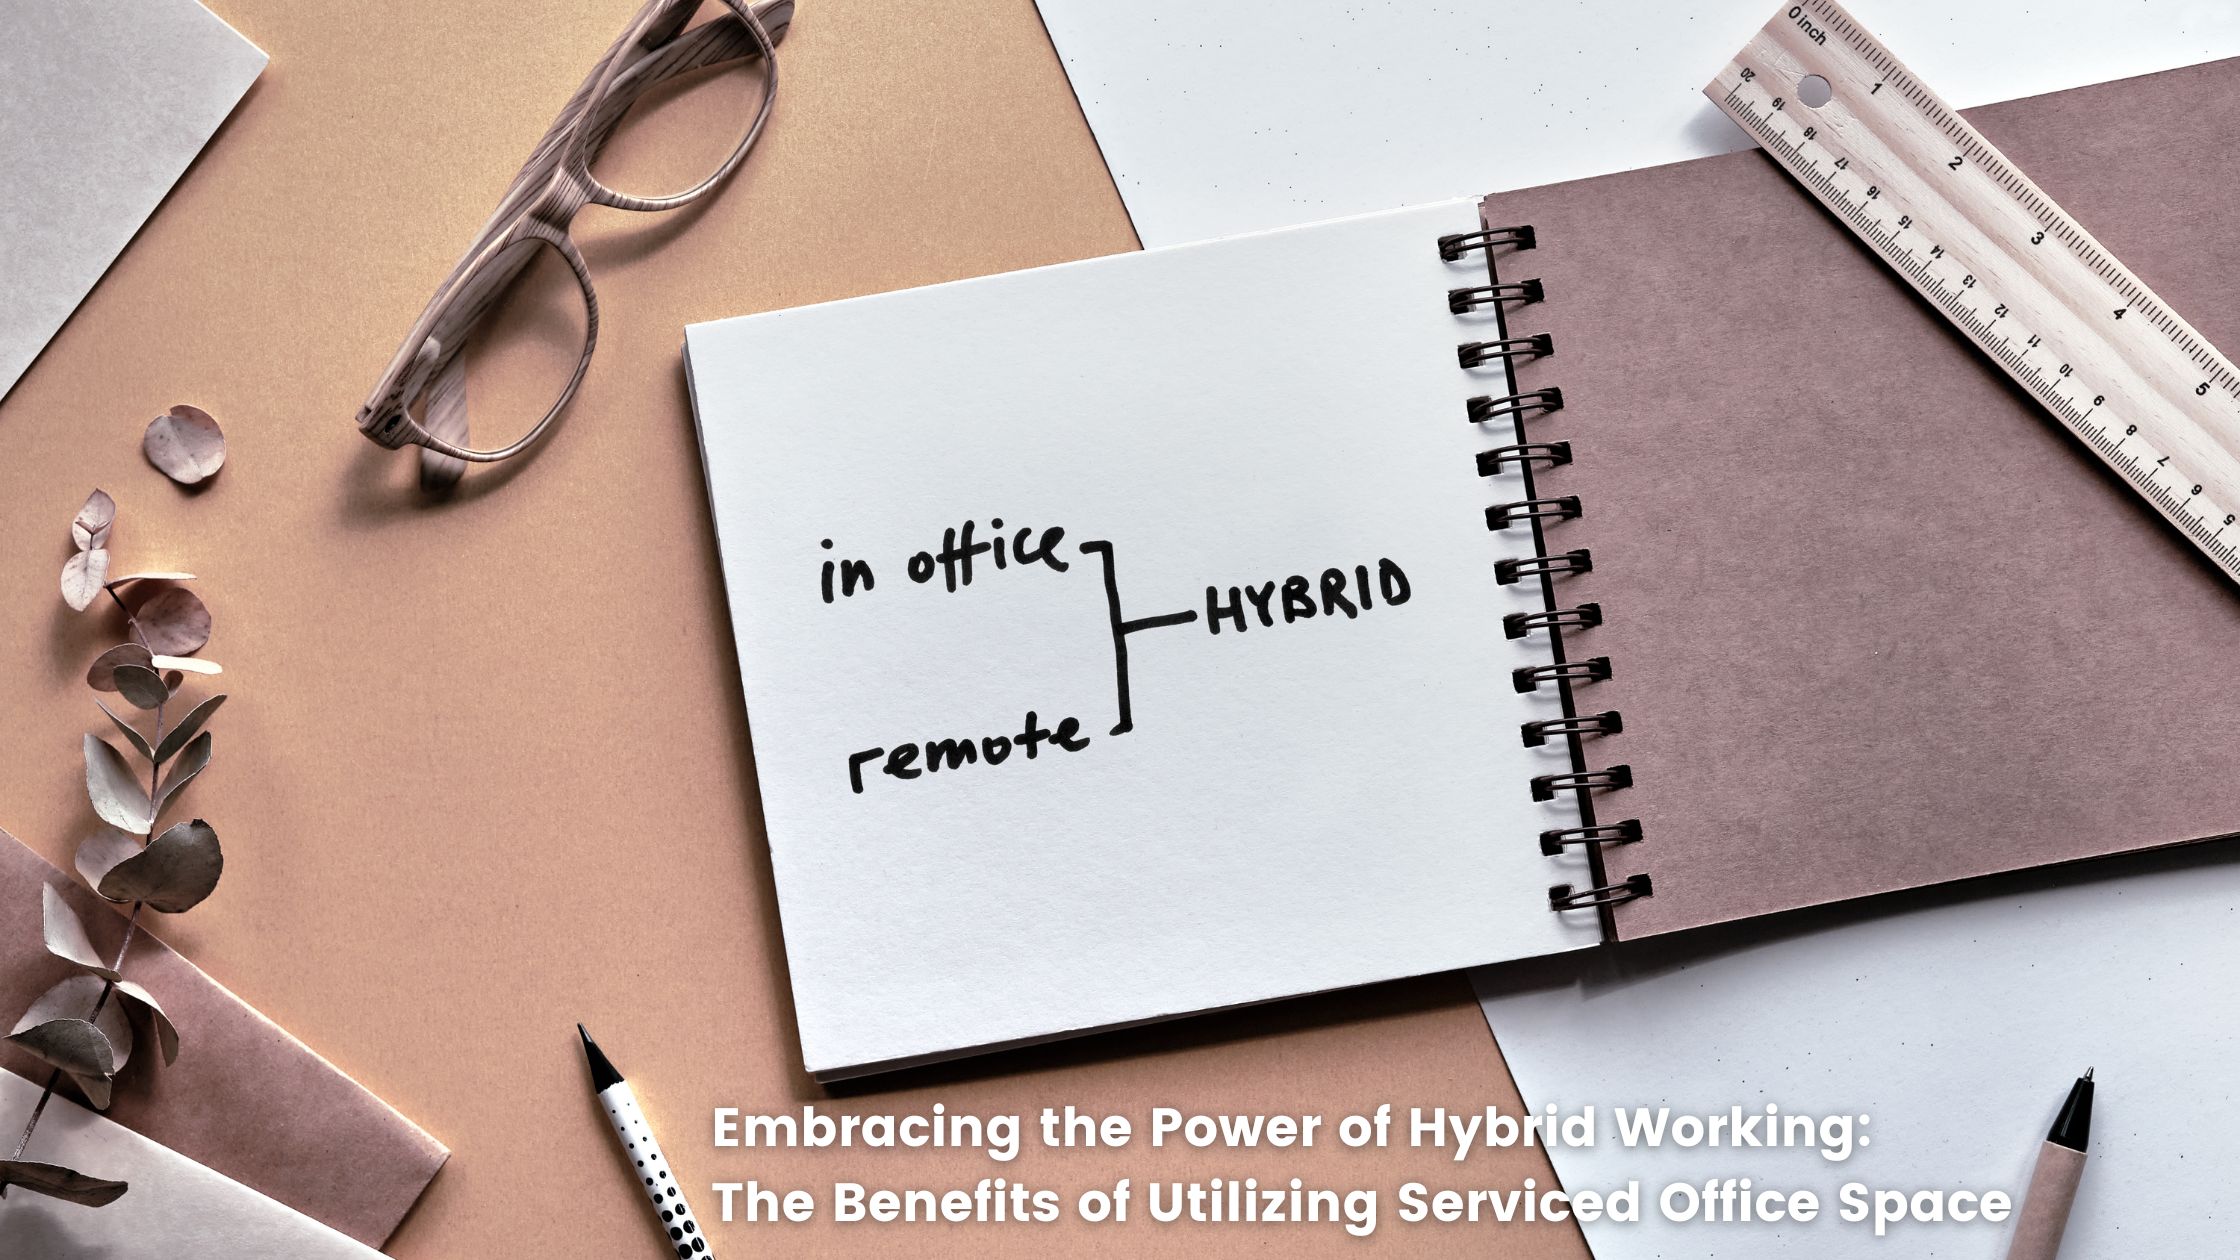 Embracing the Power of Hybrid Working The Benefits of Utilizing Serviced Office Space (1)